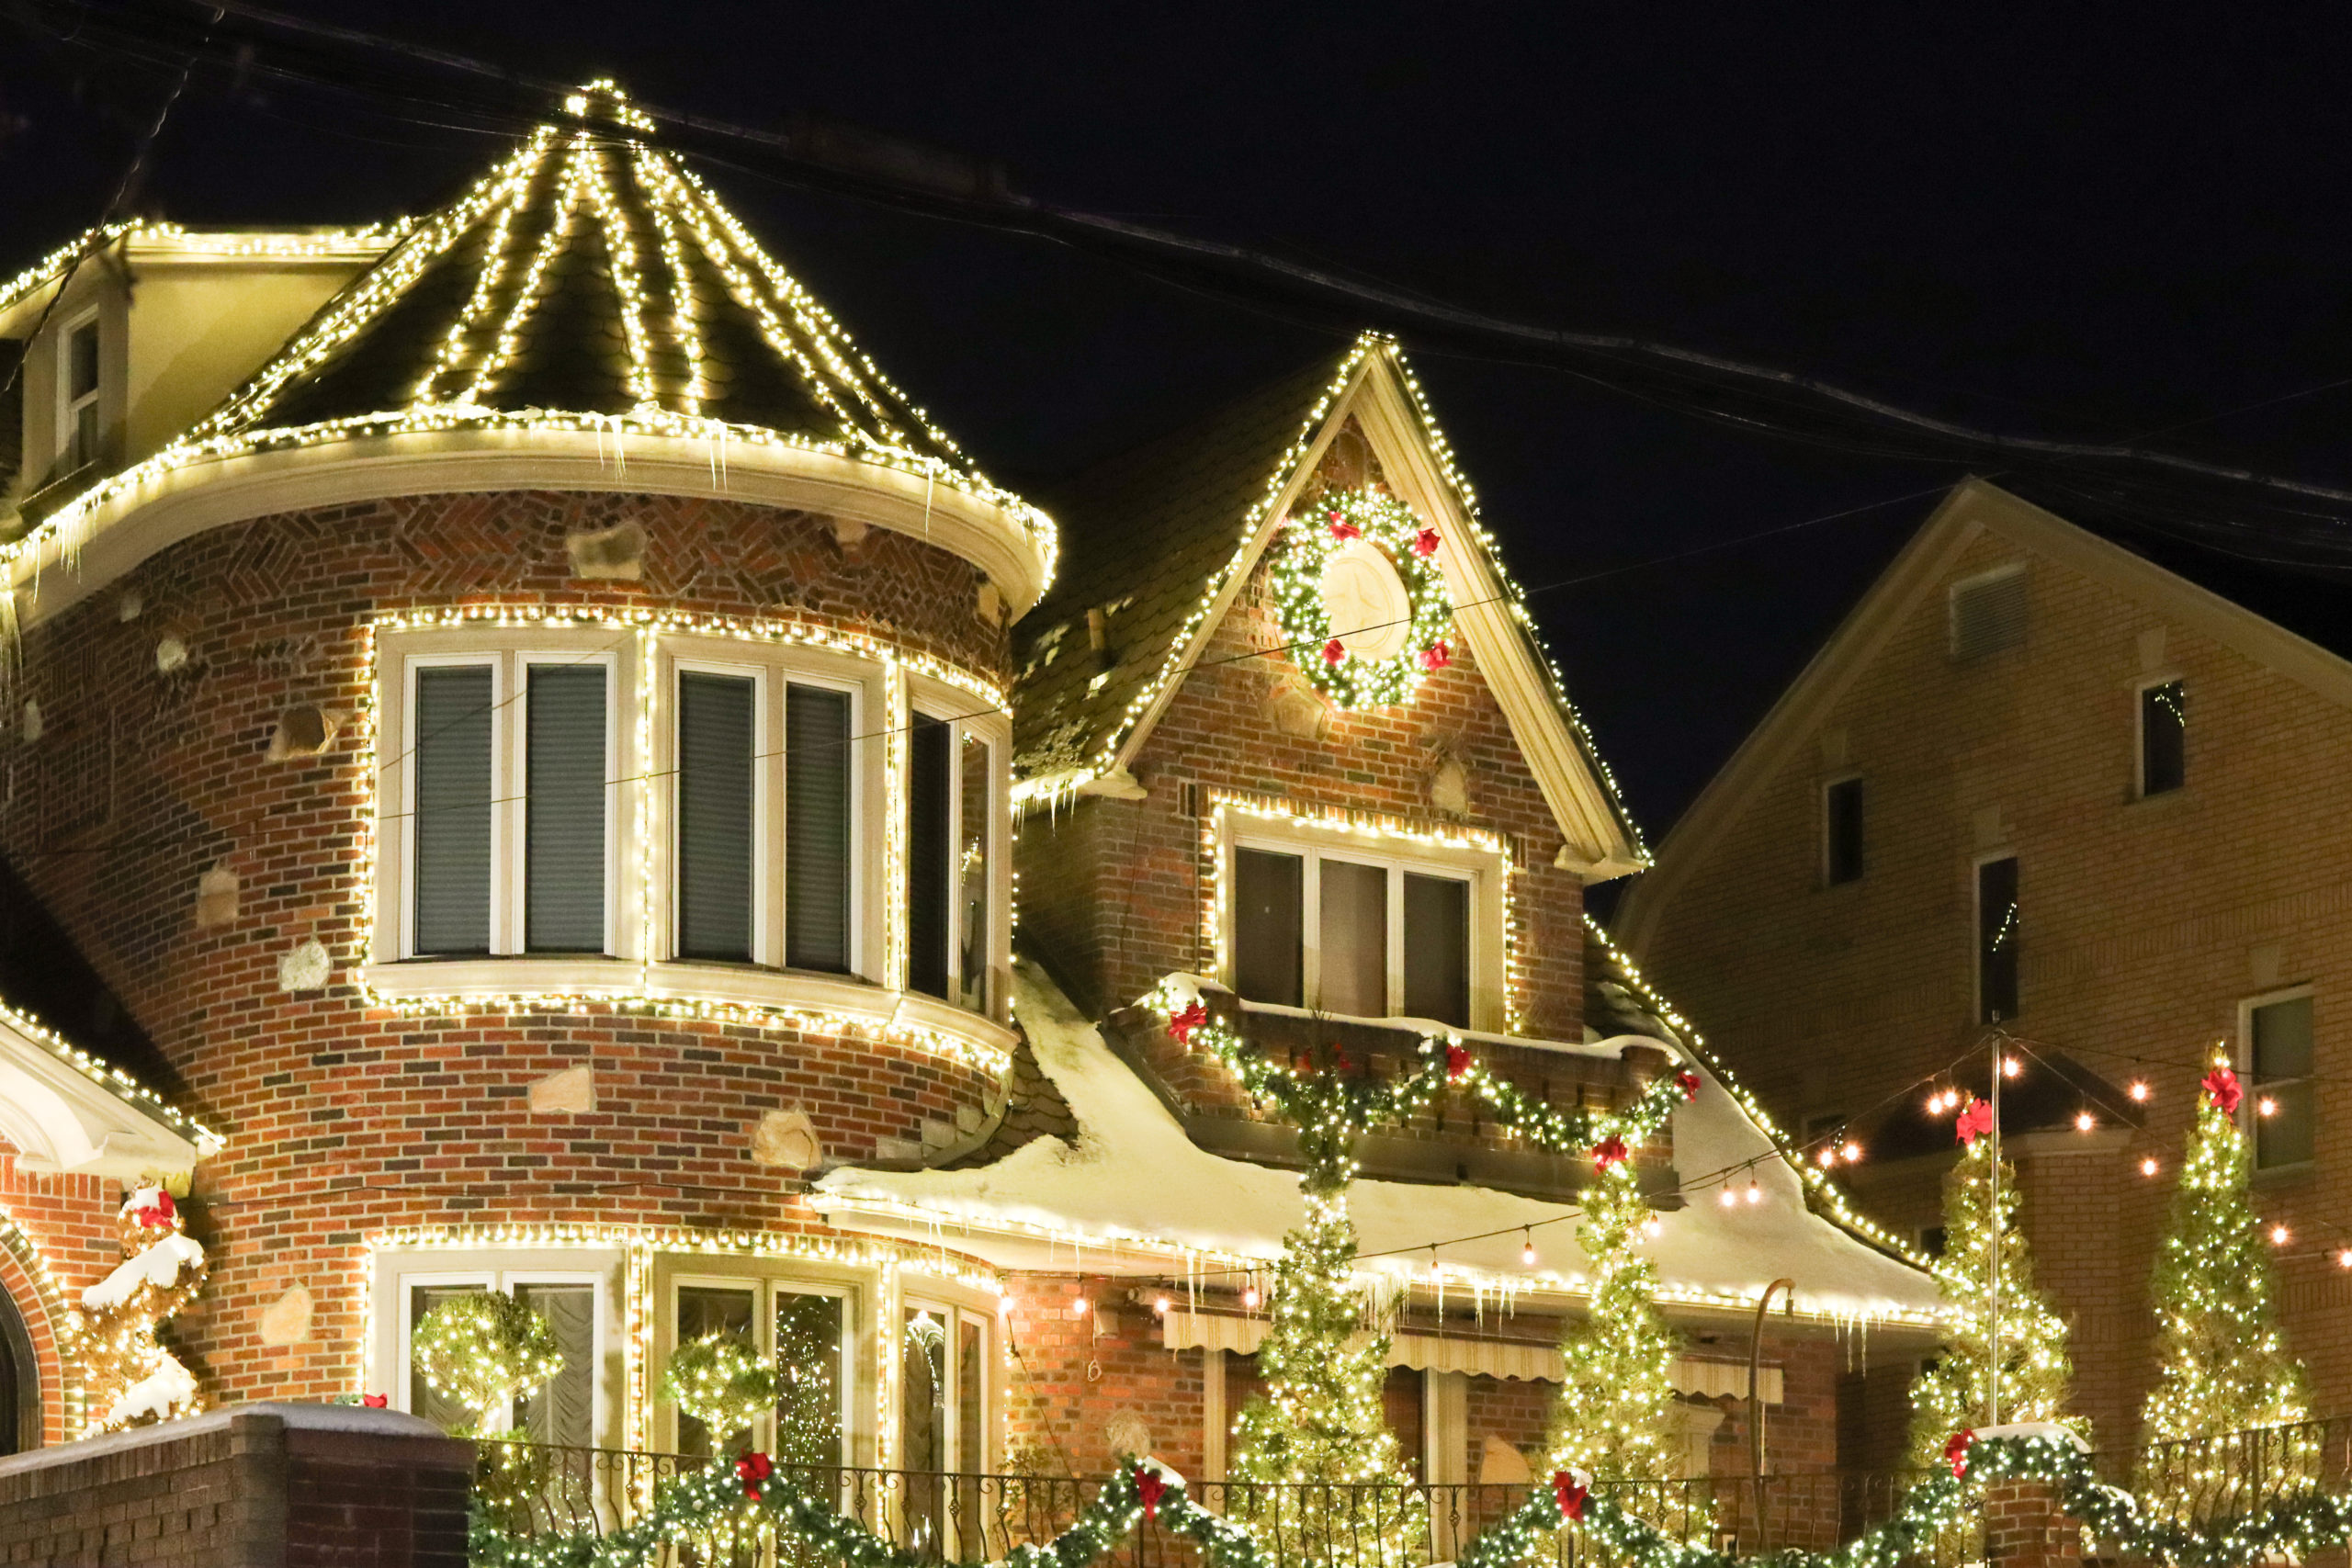 A house completely decorated for Christmas.